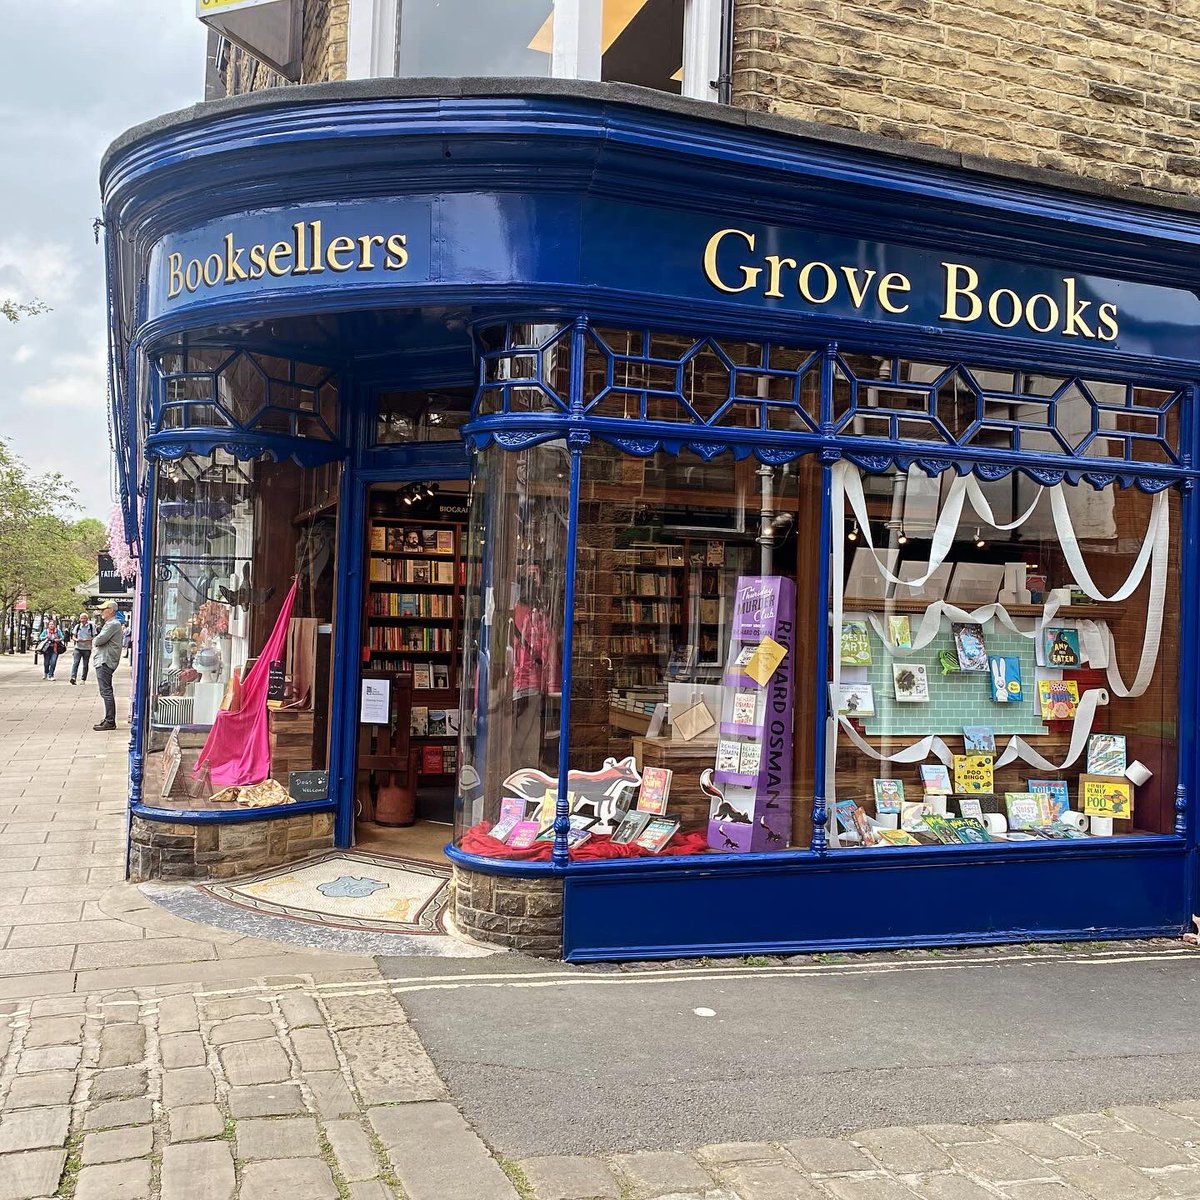 I crossed The Pennines and visited some of my bookseller friends in Teeside & the Yorkshires. Thanks for the warm welcome, lovely chat, coffee (and cream tea) @drakebookshop @WhiteRoseBooks @TrumanBooks @GroveBookshop Perks of being a bookseller! #choosebookshops